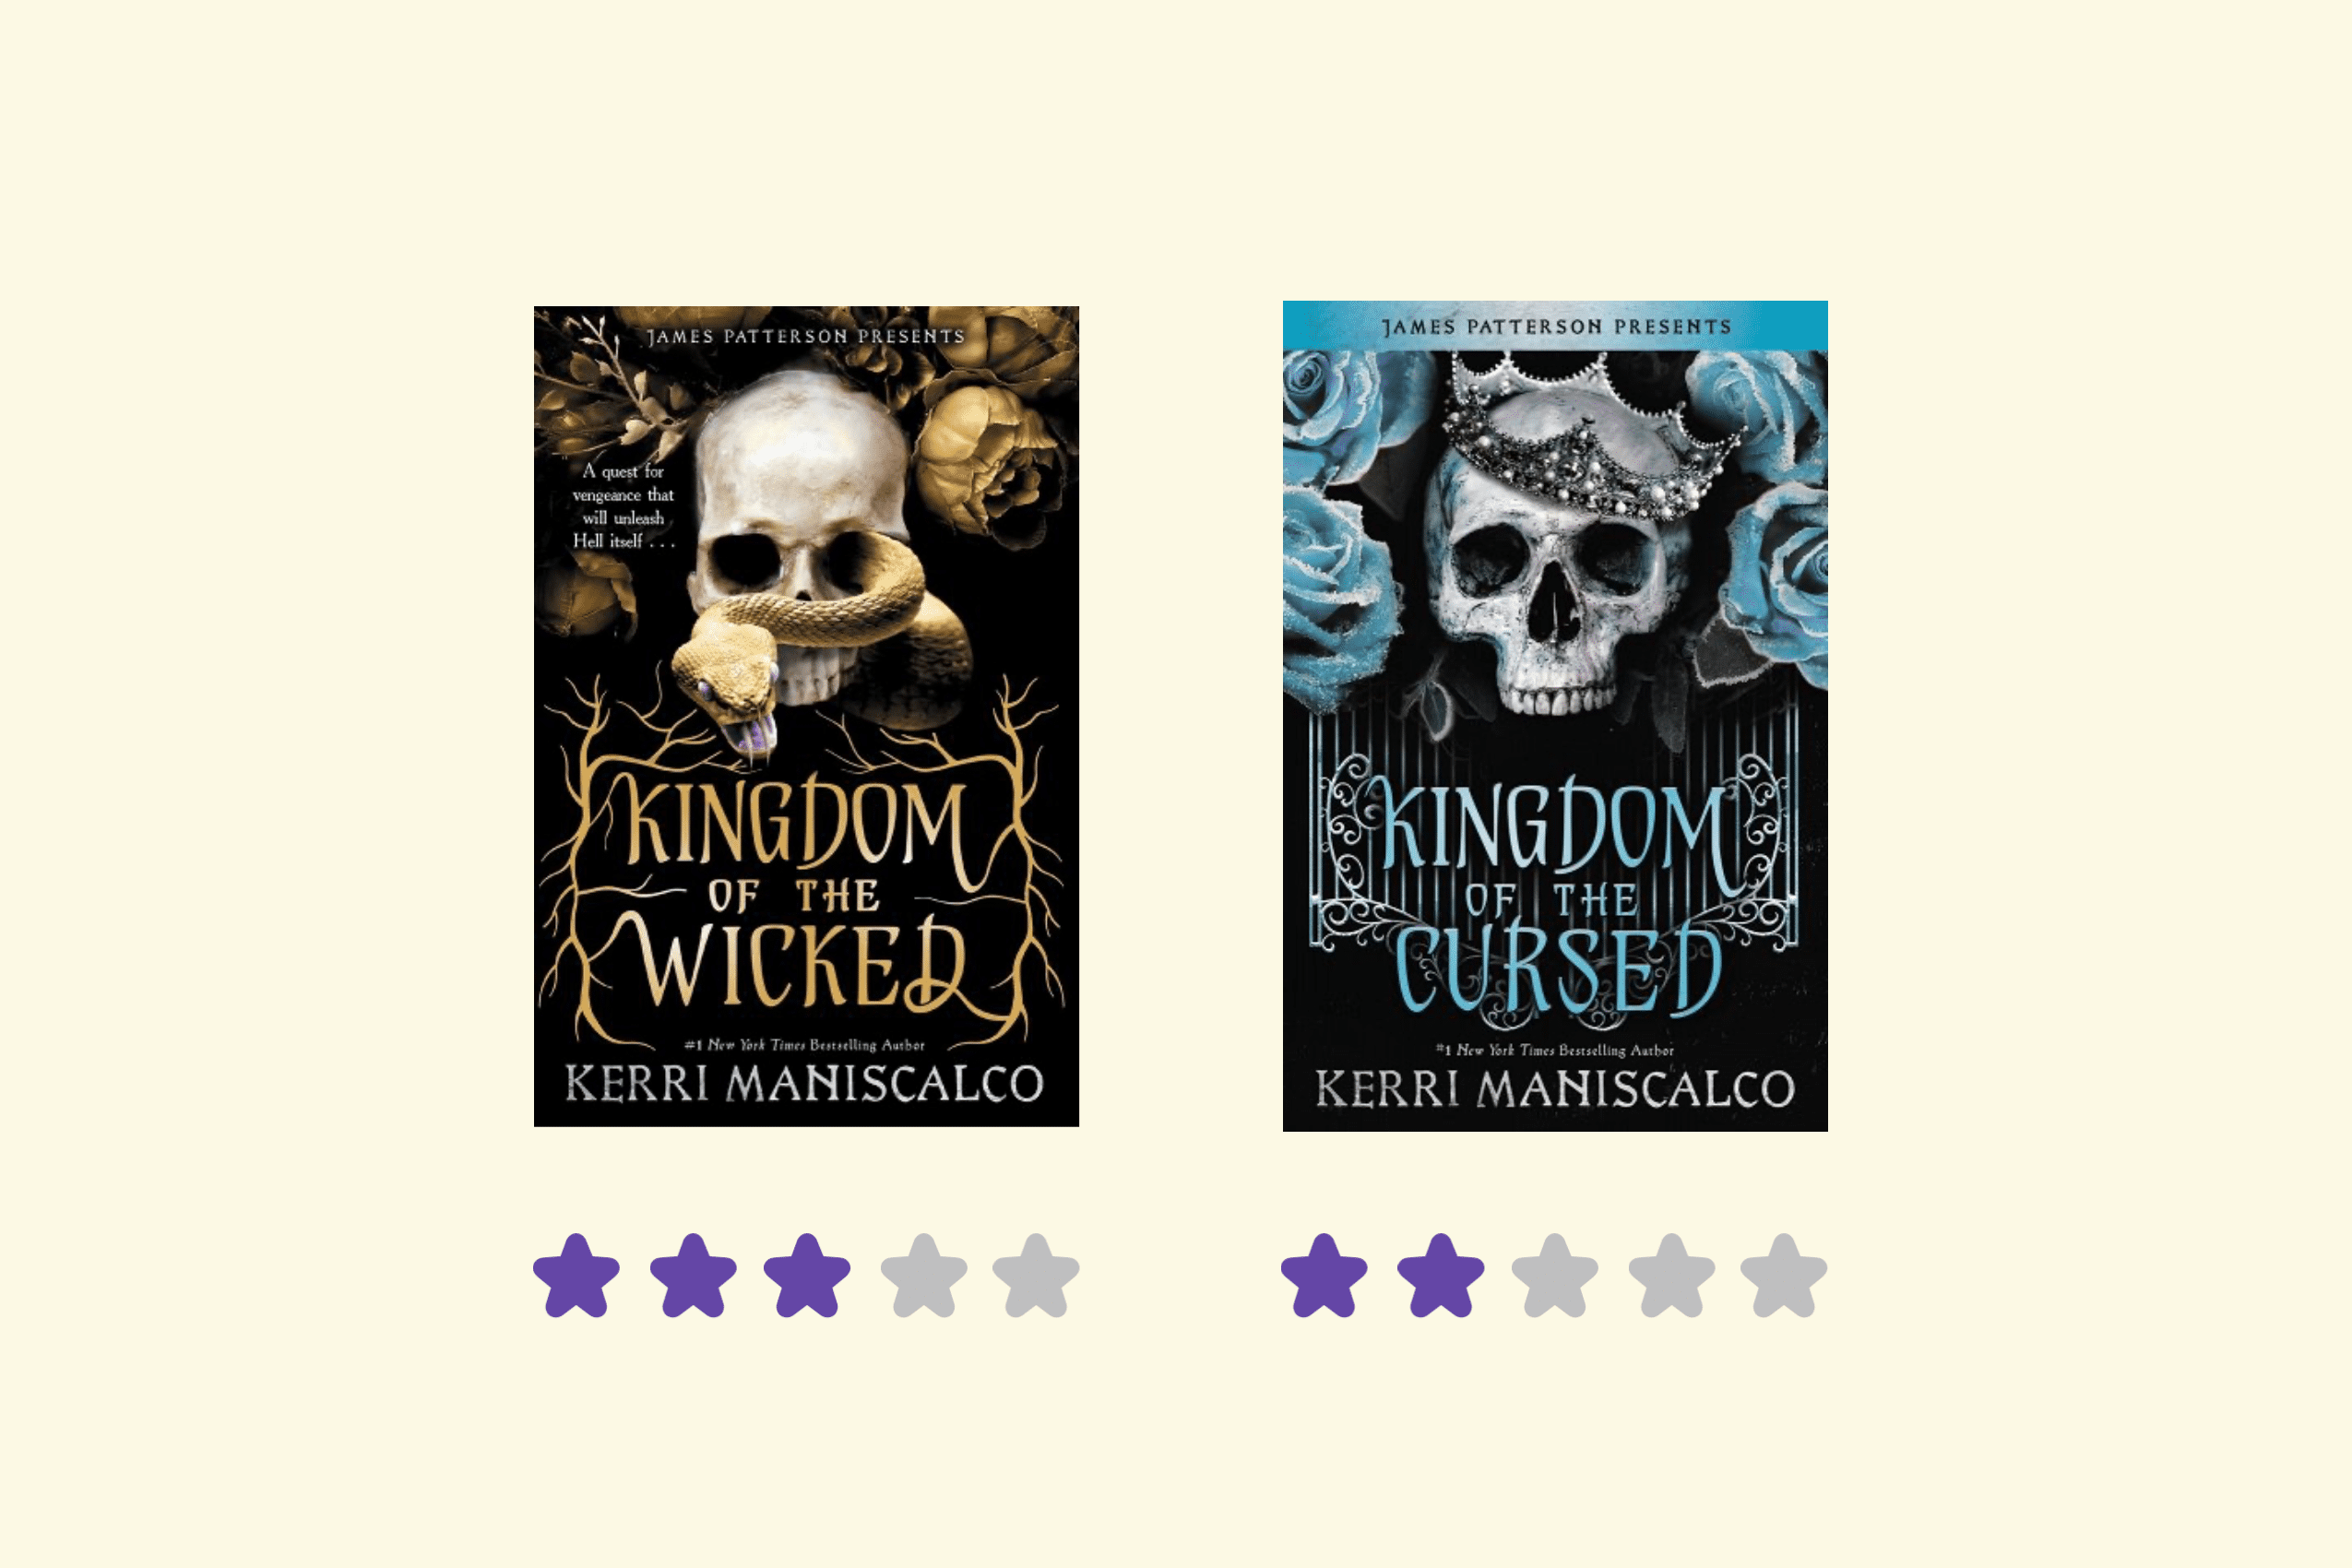 Kingdom of the Wicked (Book Series)